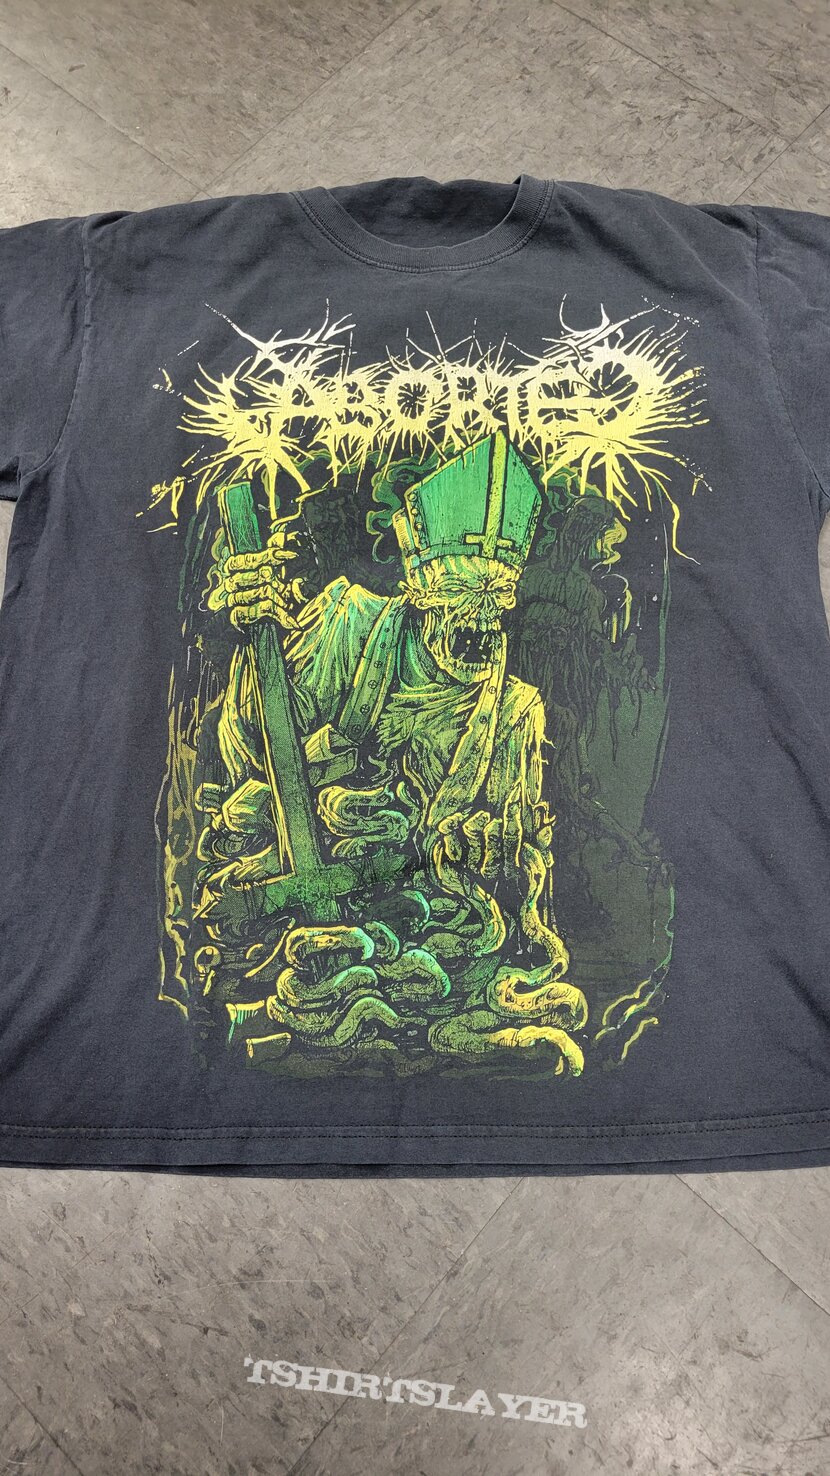 Aborted &quot;Our Father Who Art Of Feces&quot; shirt